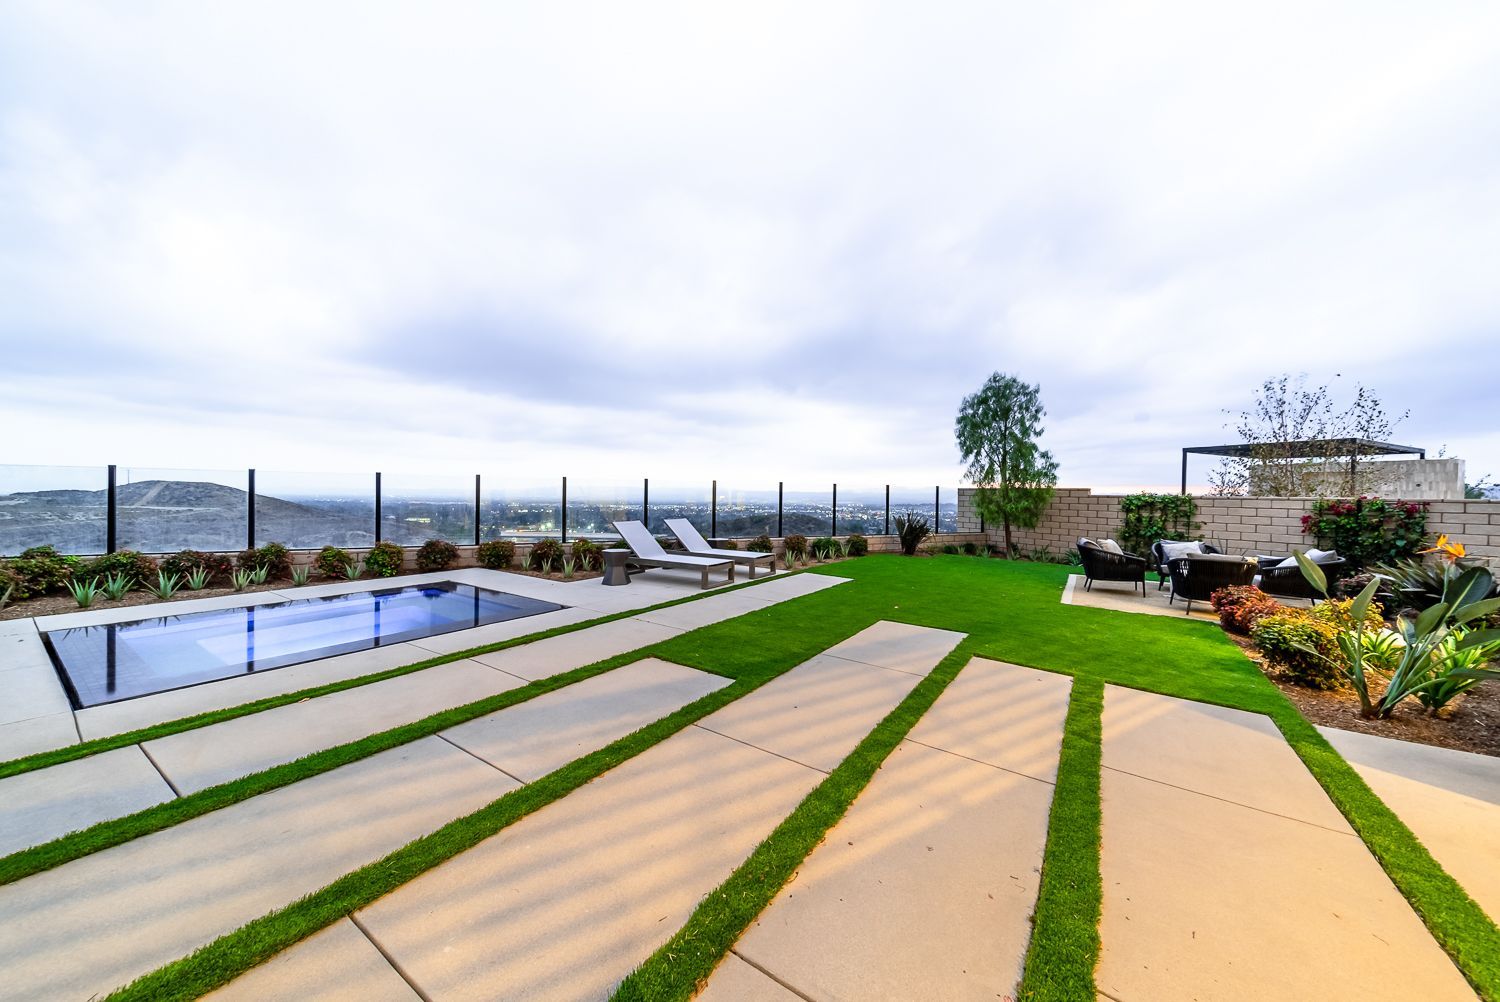 Luxury spa and outdoor living space by Westmod. Location: Chatsworth, CA